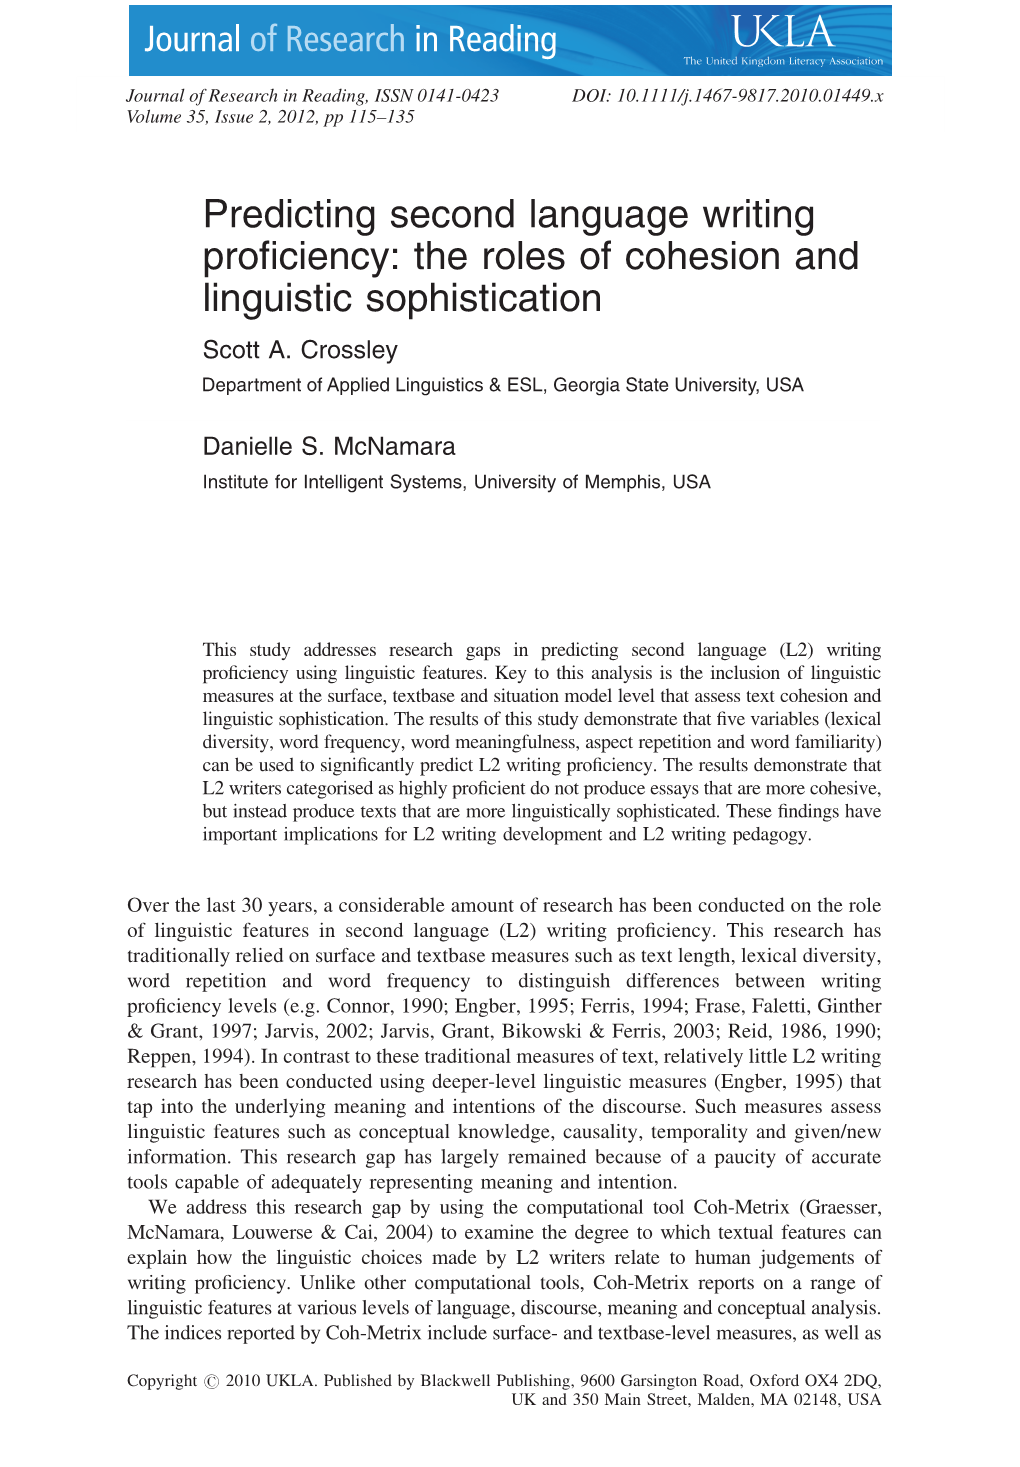 Predicting Second Language Writing Proficiency: the Roles of Cohesion